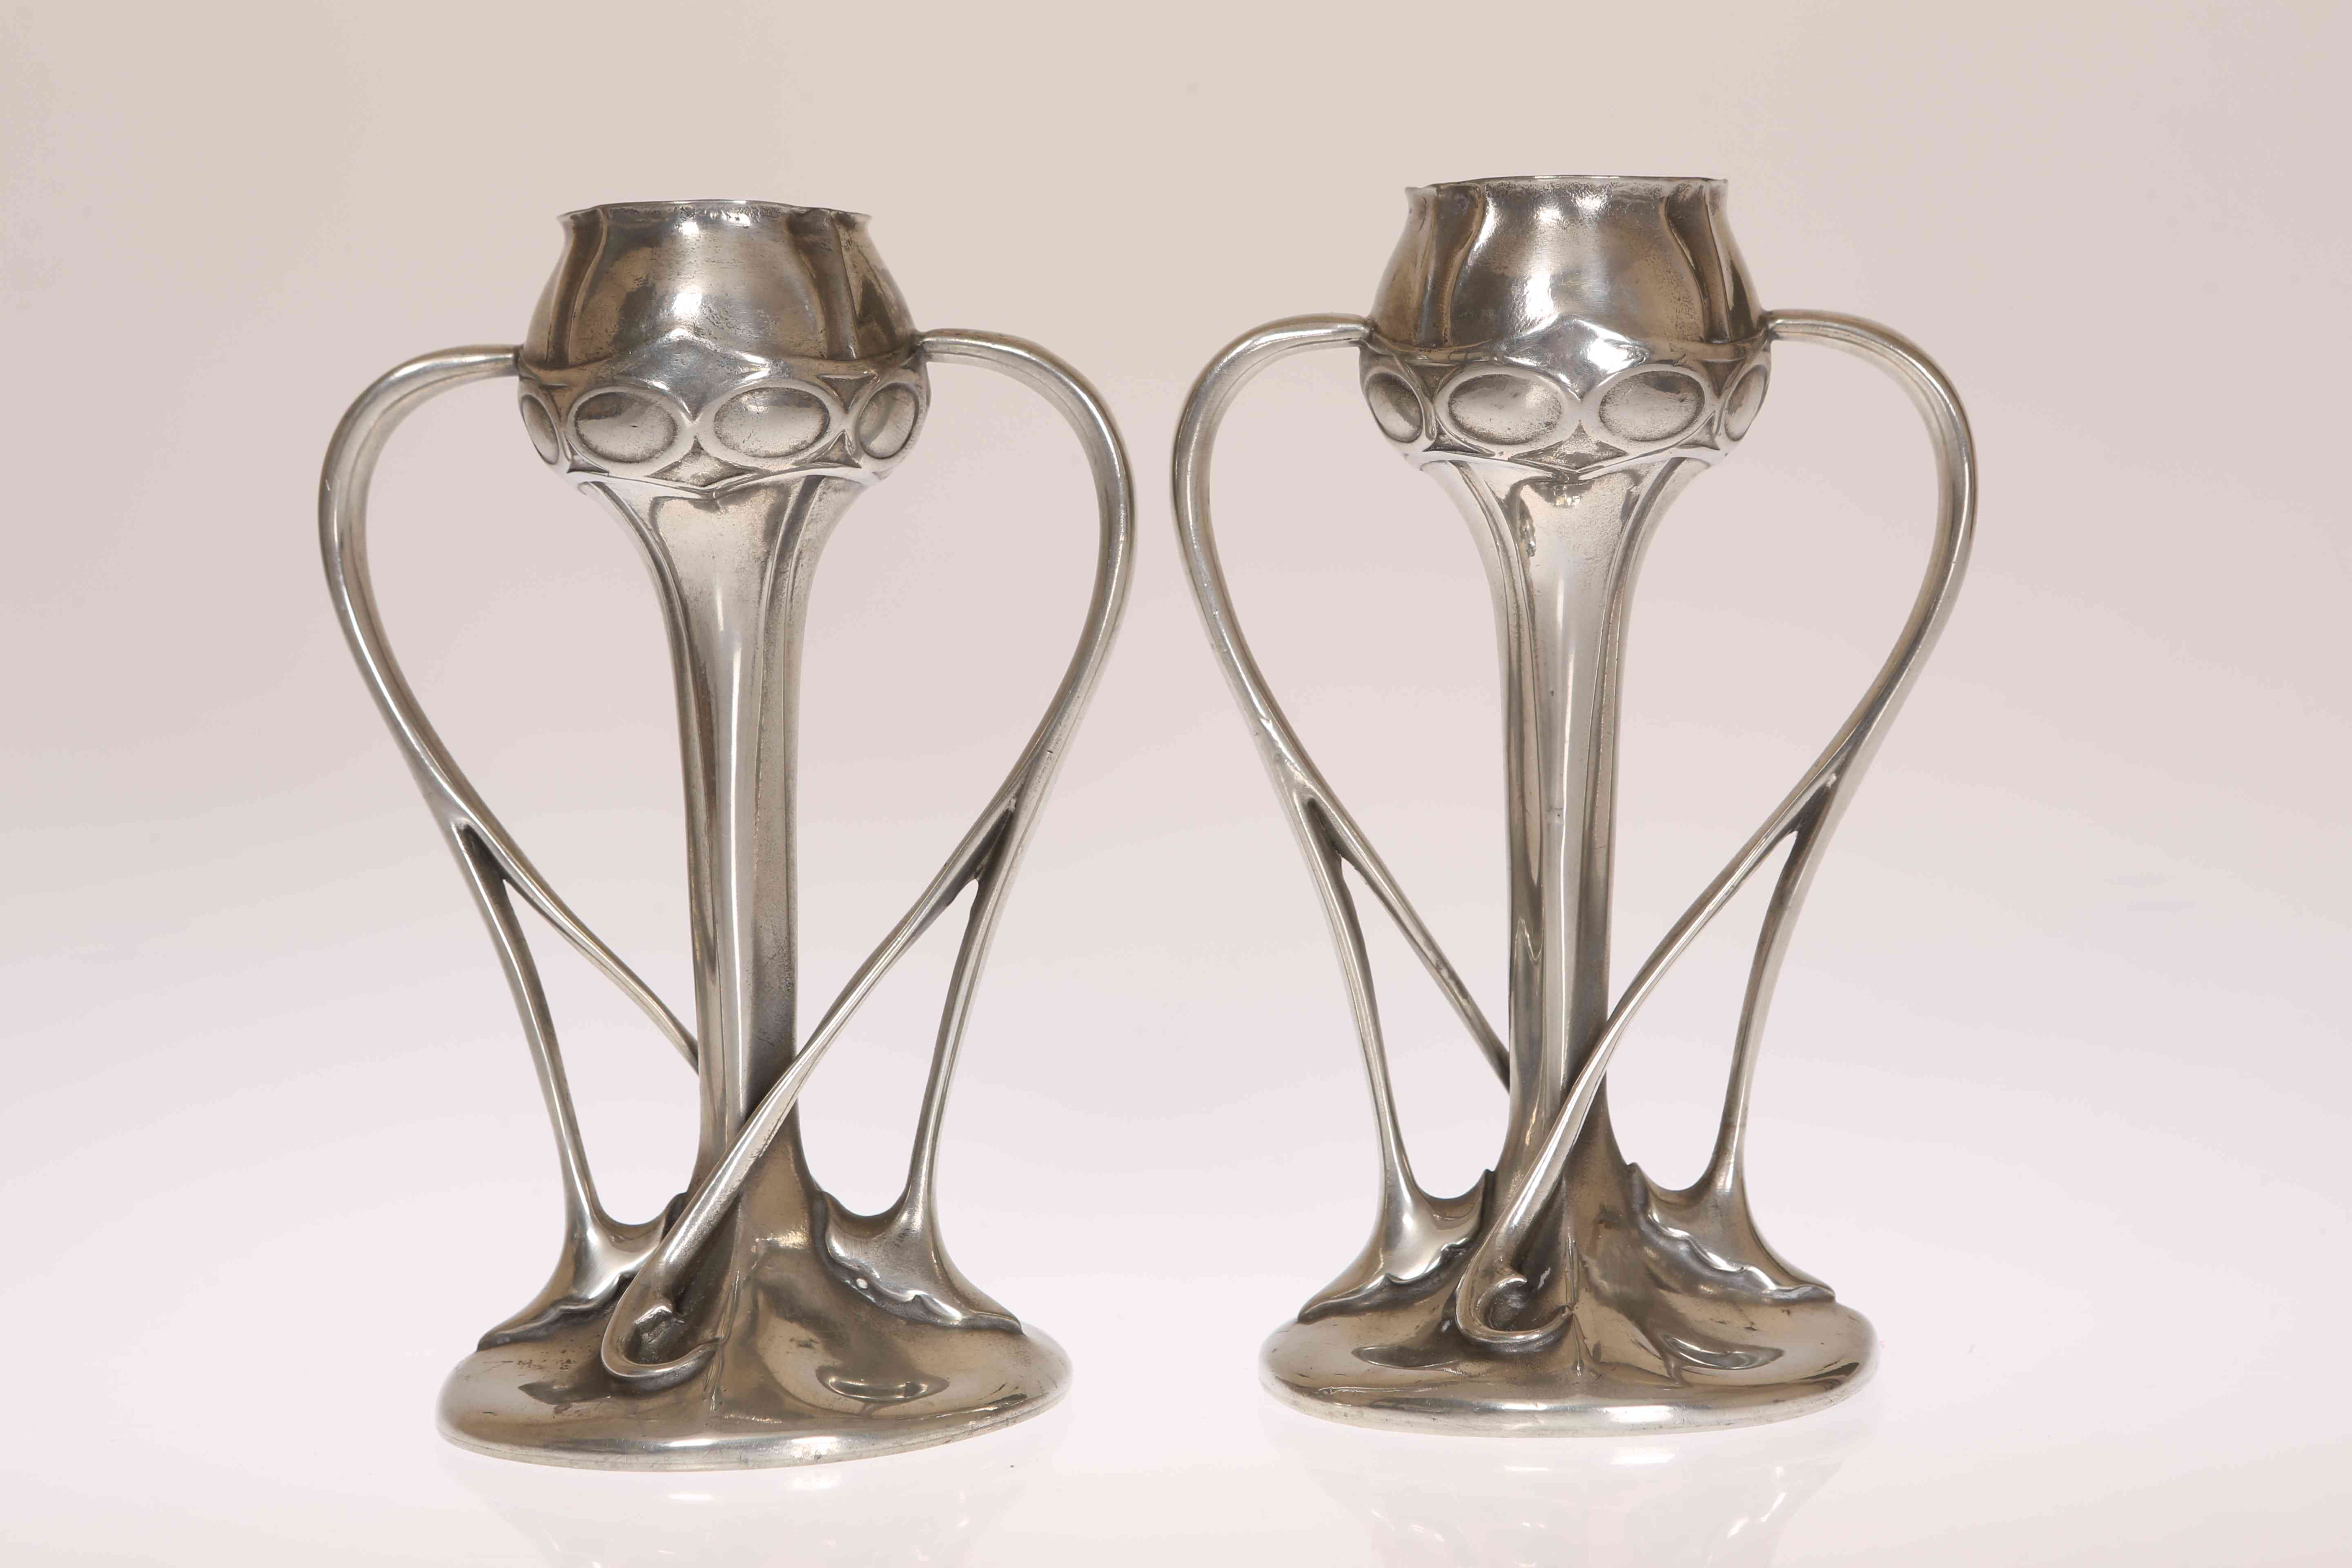 A PAIR OF LIBERTY & CO TUDRIC PEWTER TULIP VASES, DESIGNED BY ARCHIBALD KNOX,